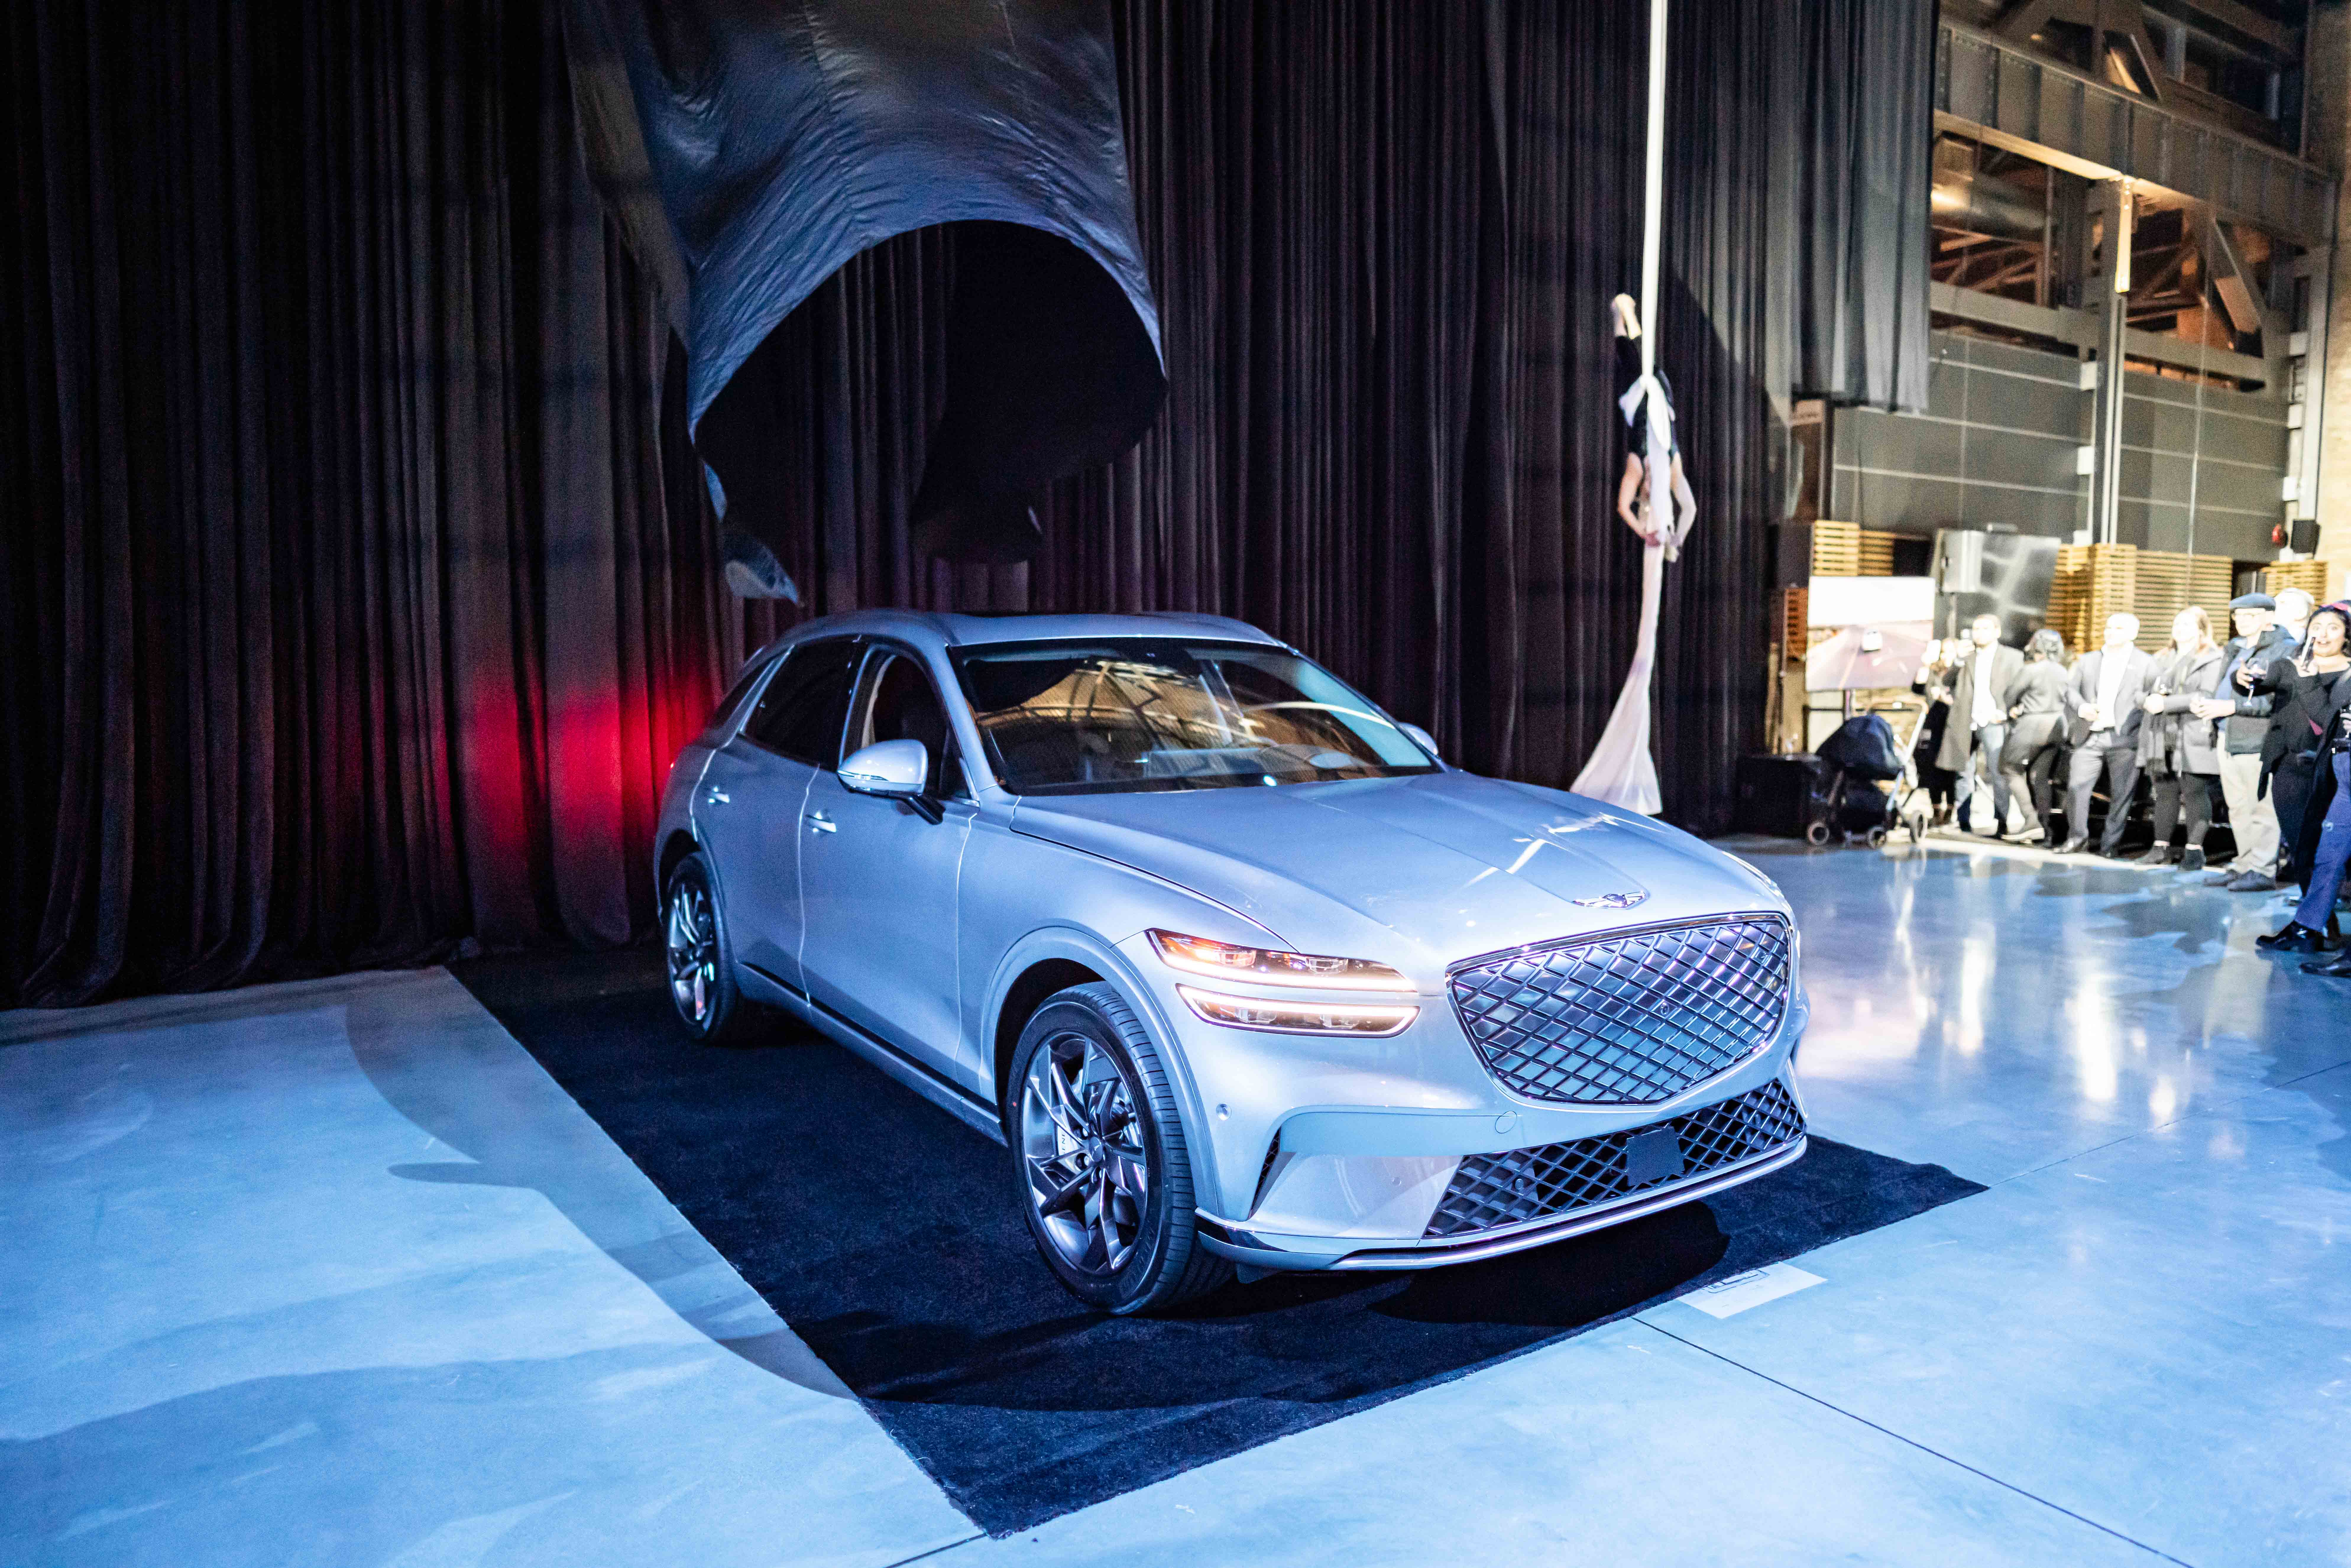 Luxury, Style, and Art; Introducing the Genesis Electrified GV70